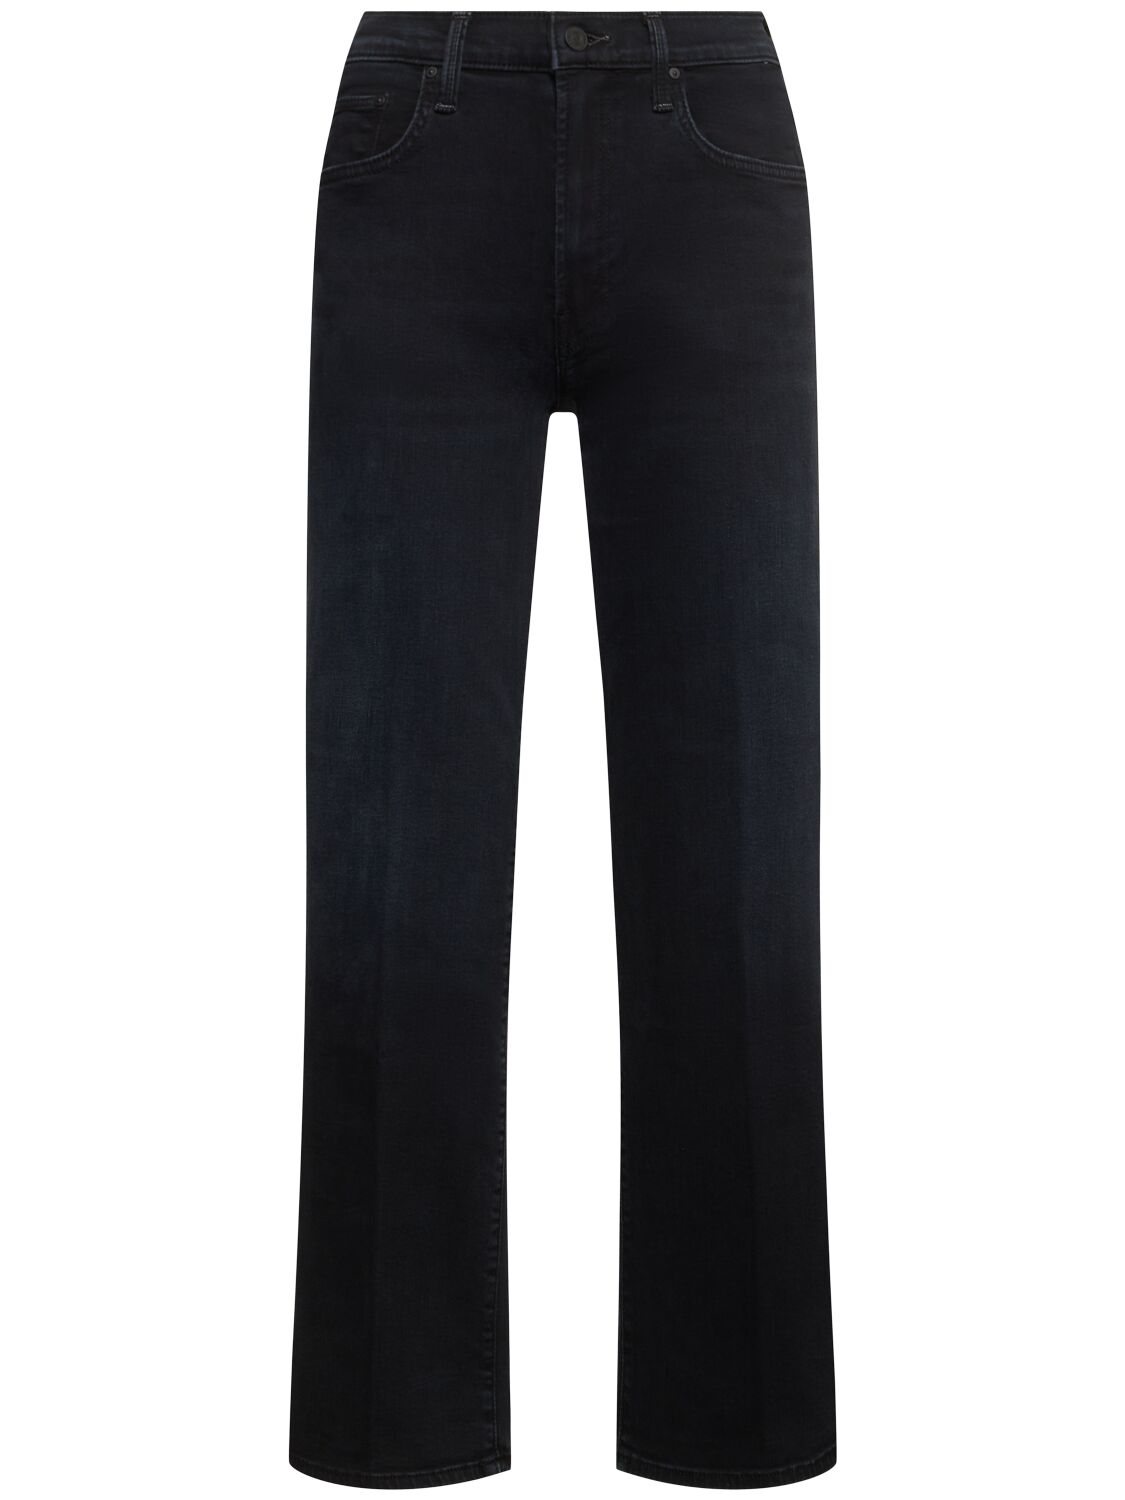 The Mid Rise Rambler Straight Jeans